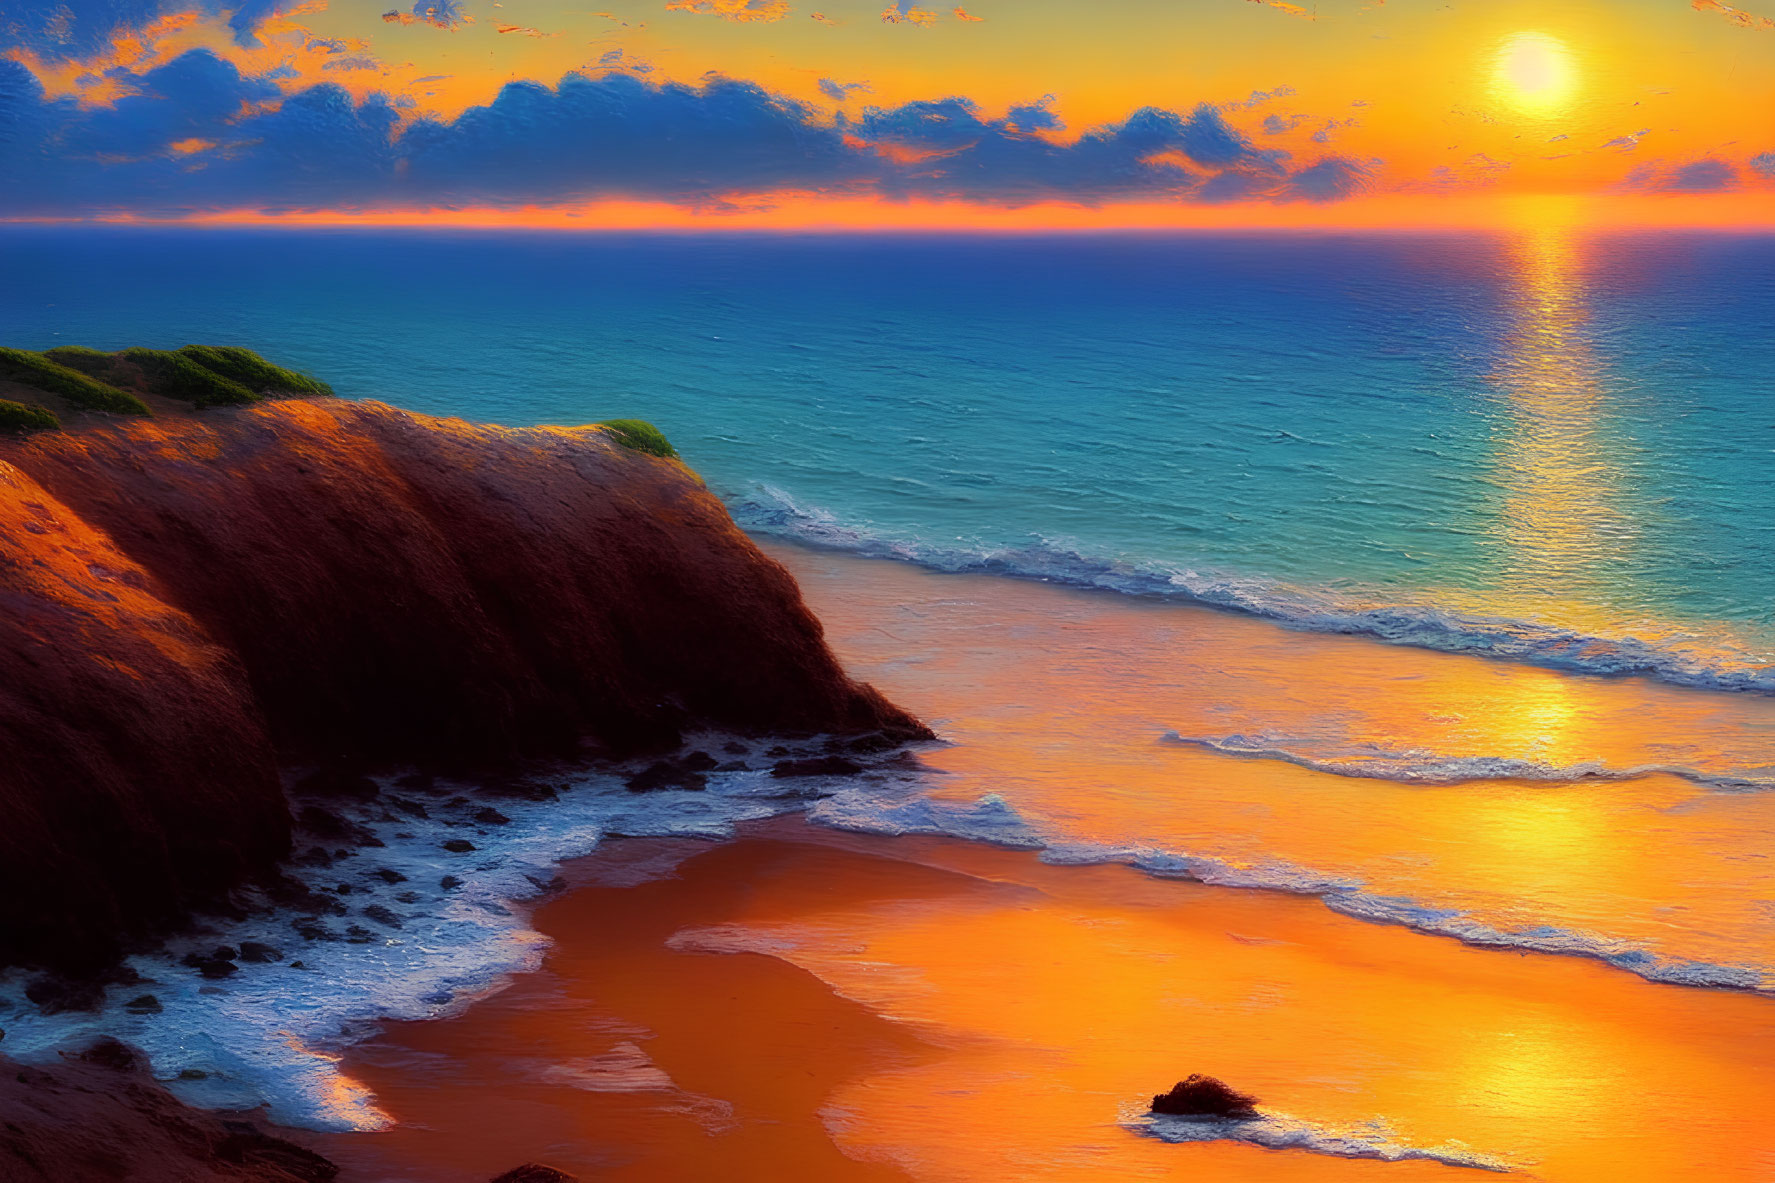 Scenic sunset at beach with cliffs and colorful sky